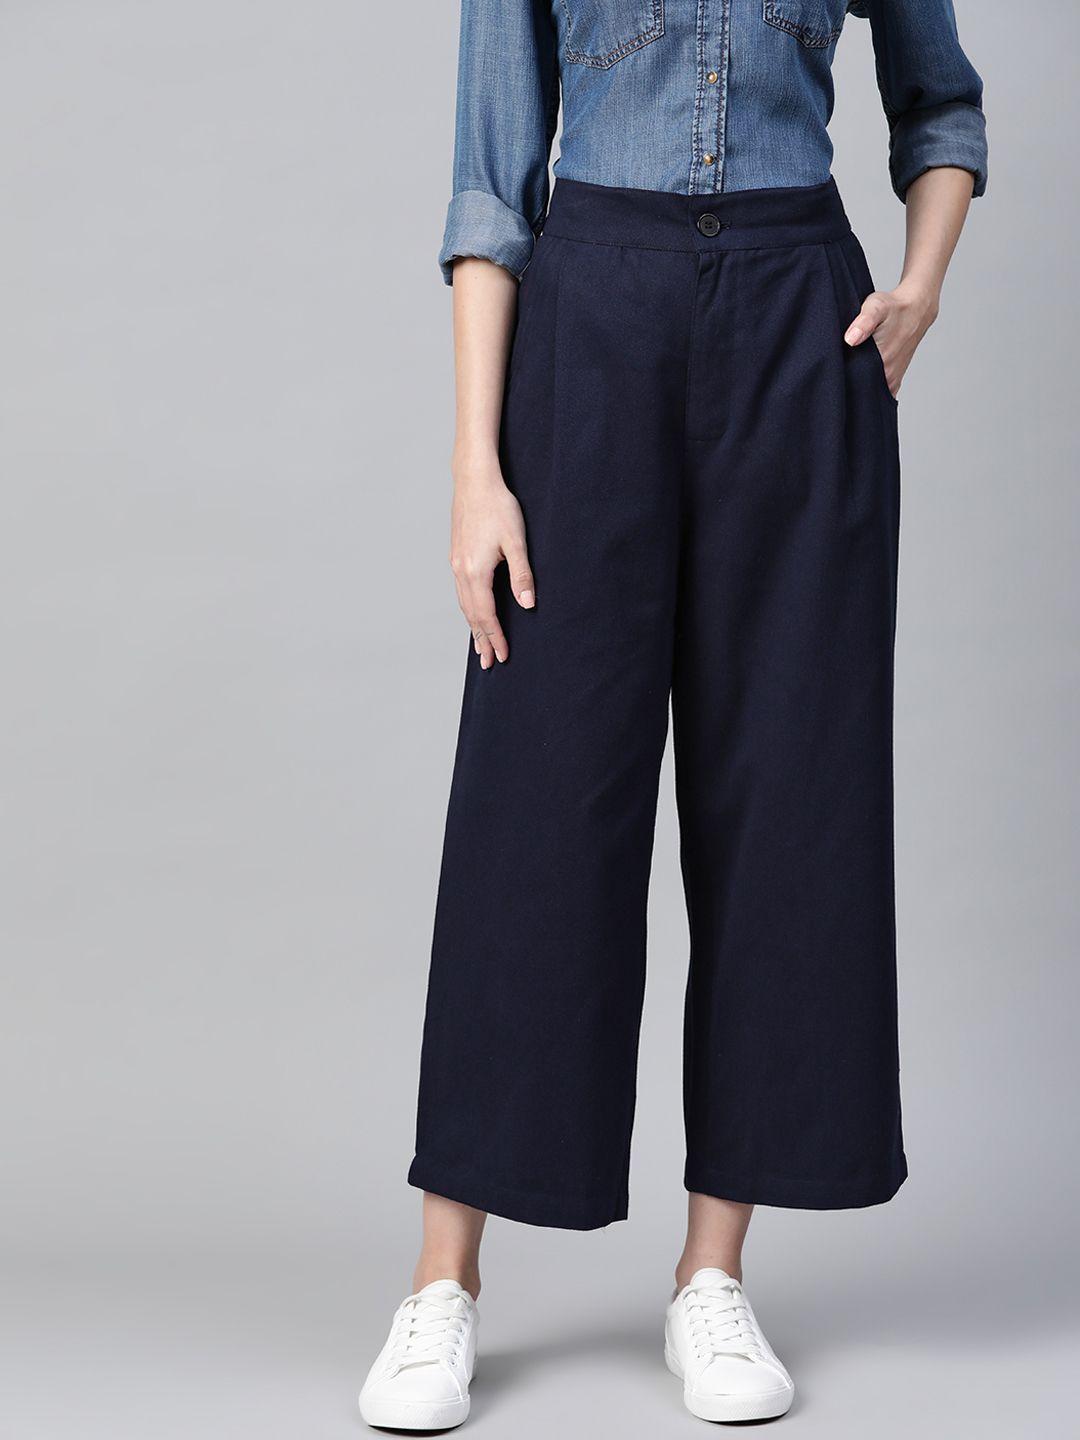 popnetic women navy blue cotton cropped parallel trousers